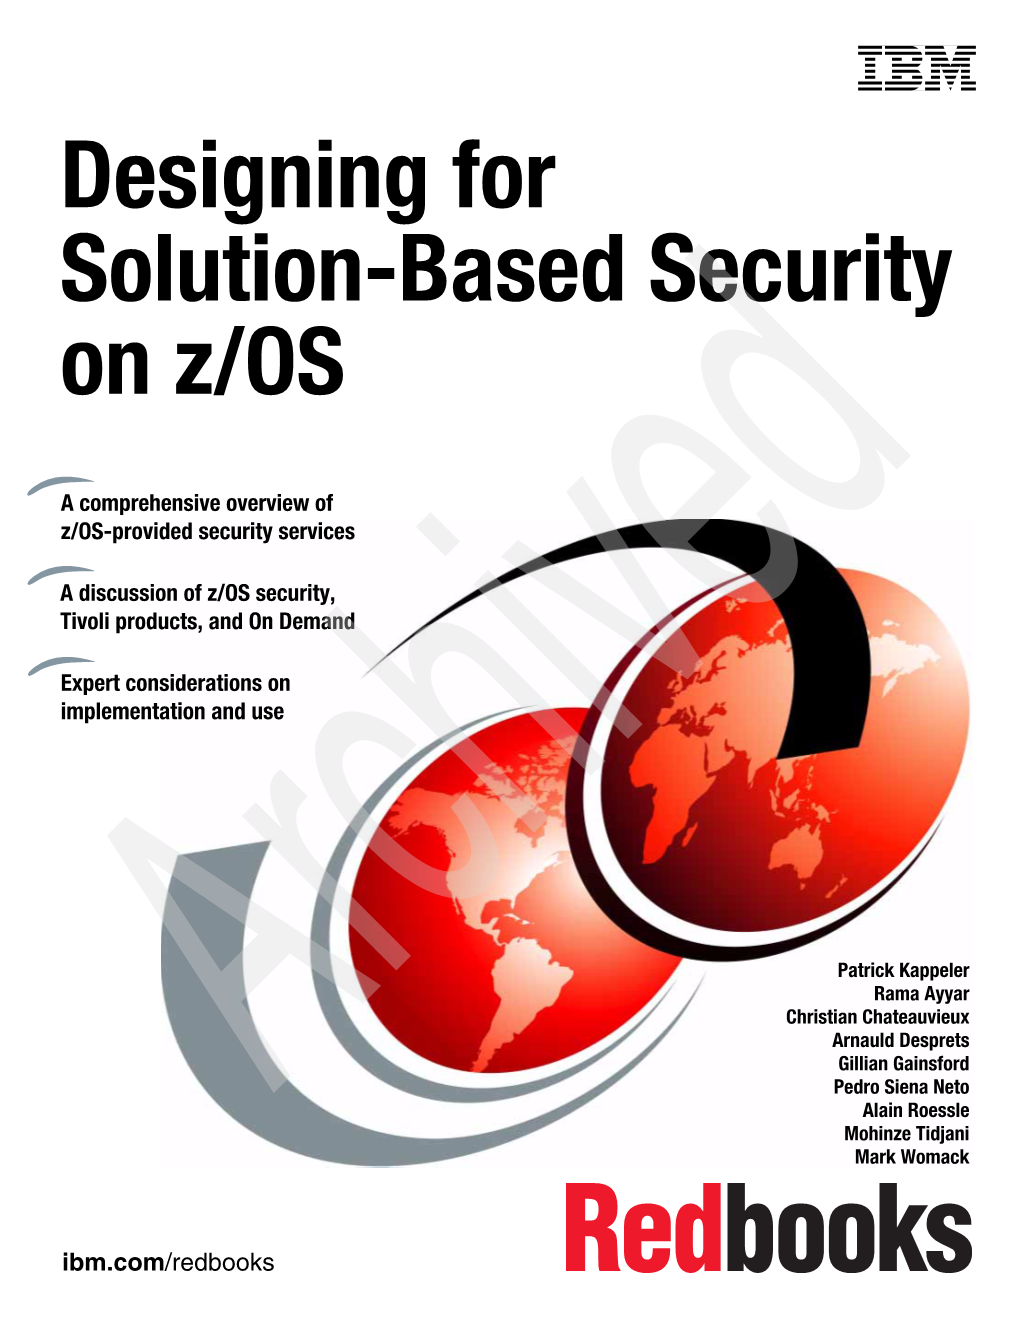 Designing for Solution-Based Security on Z/OS